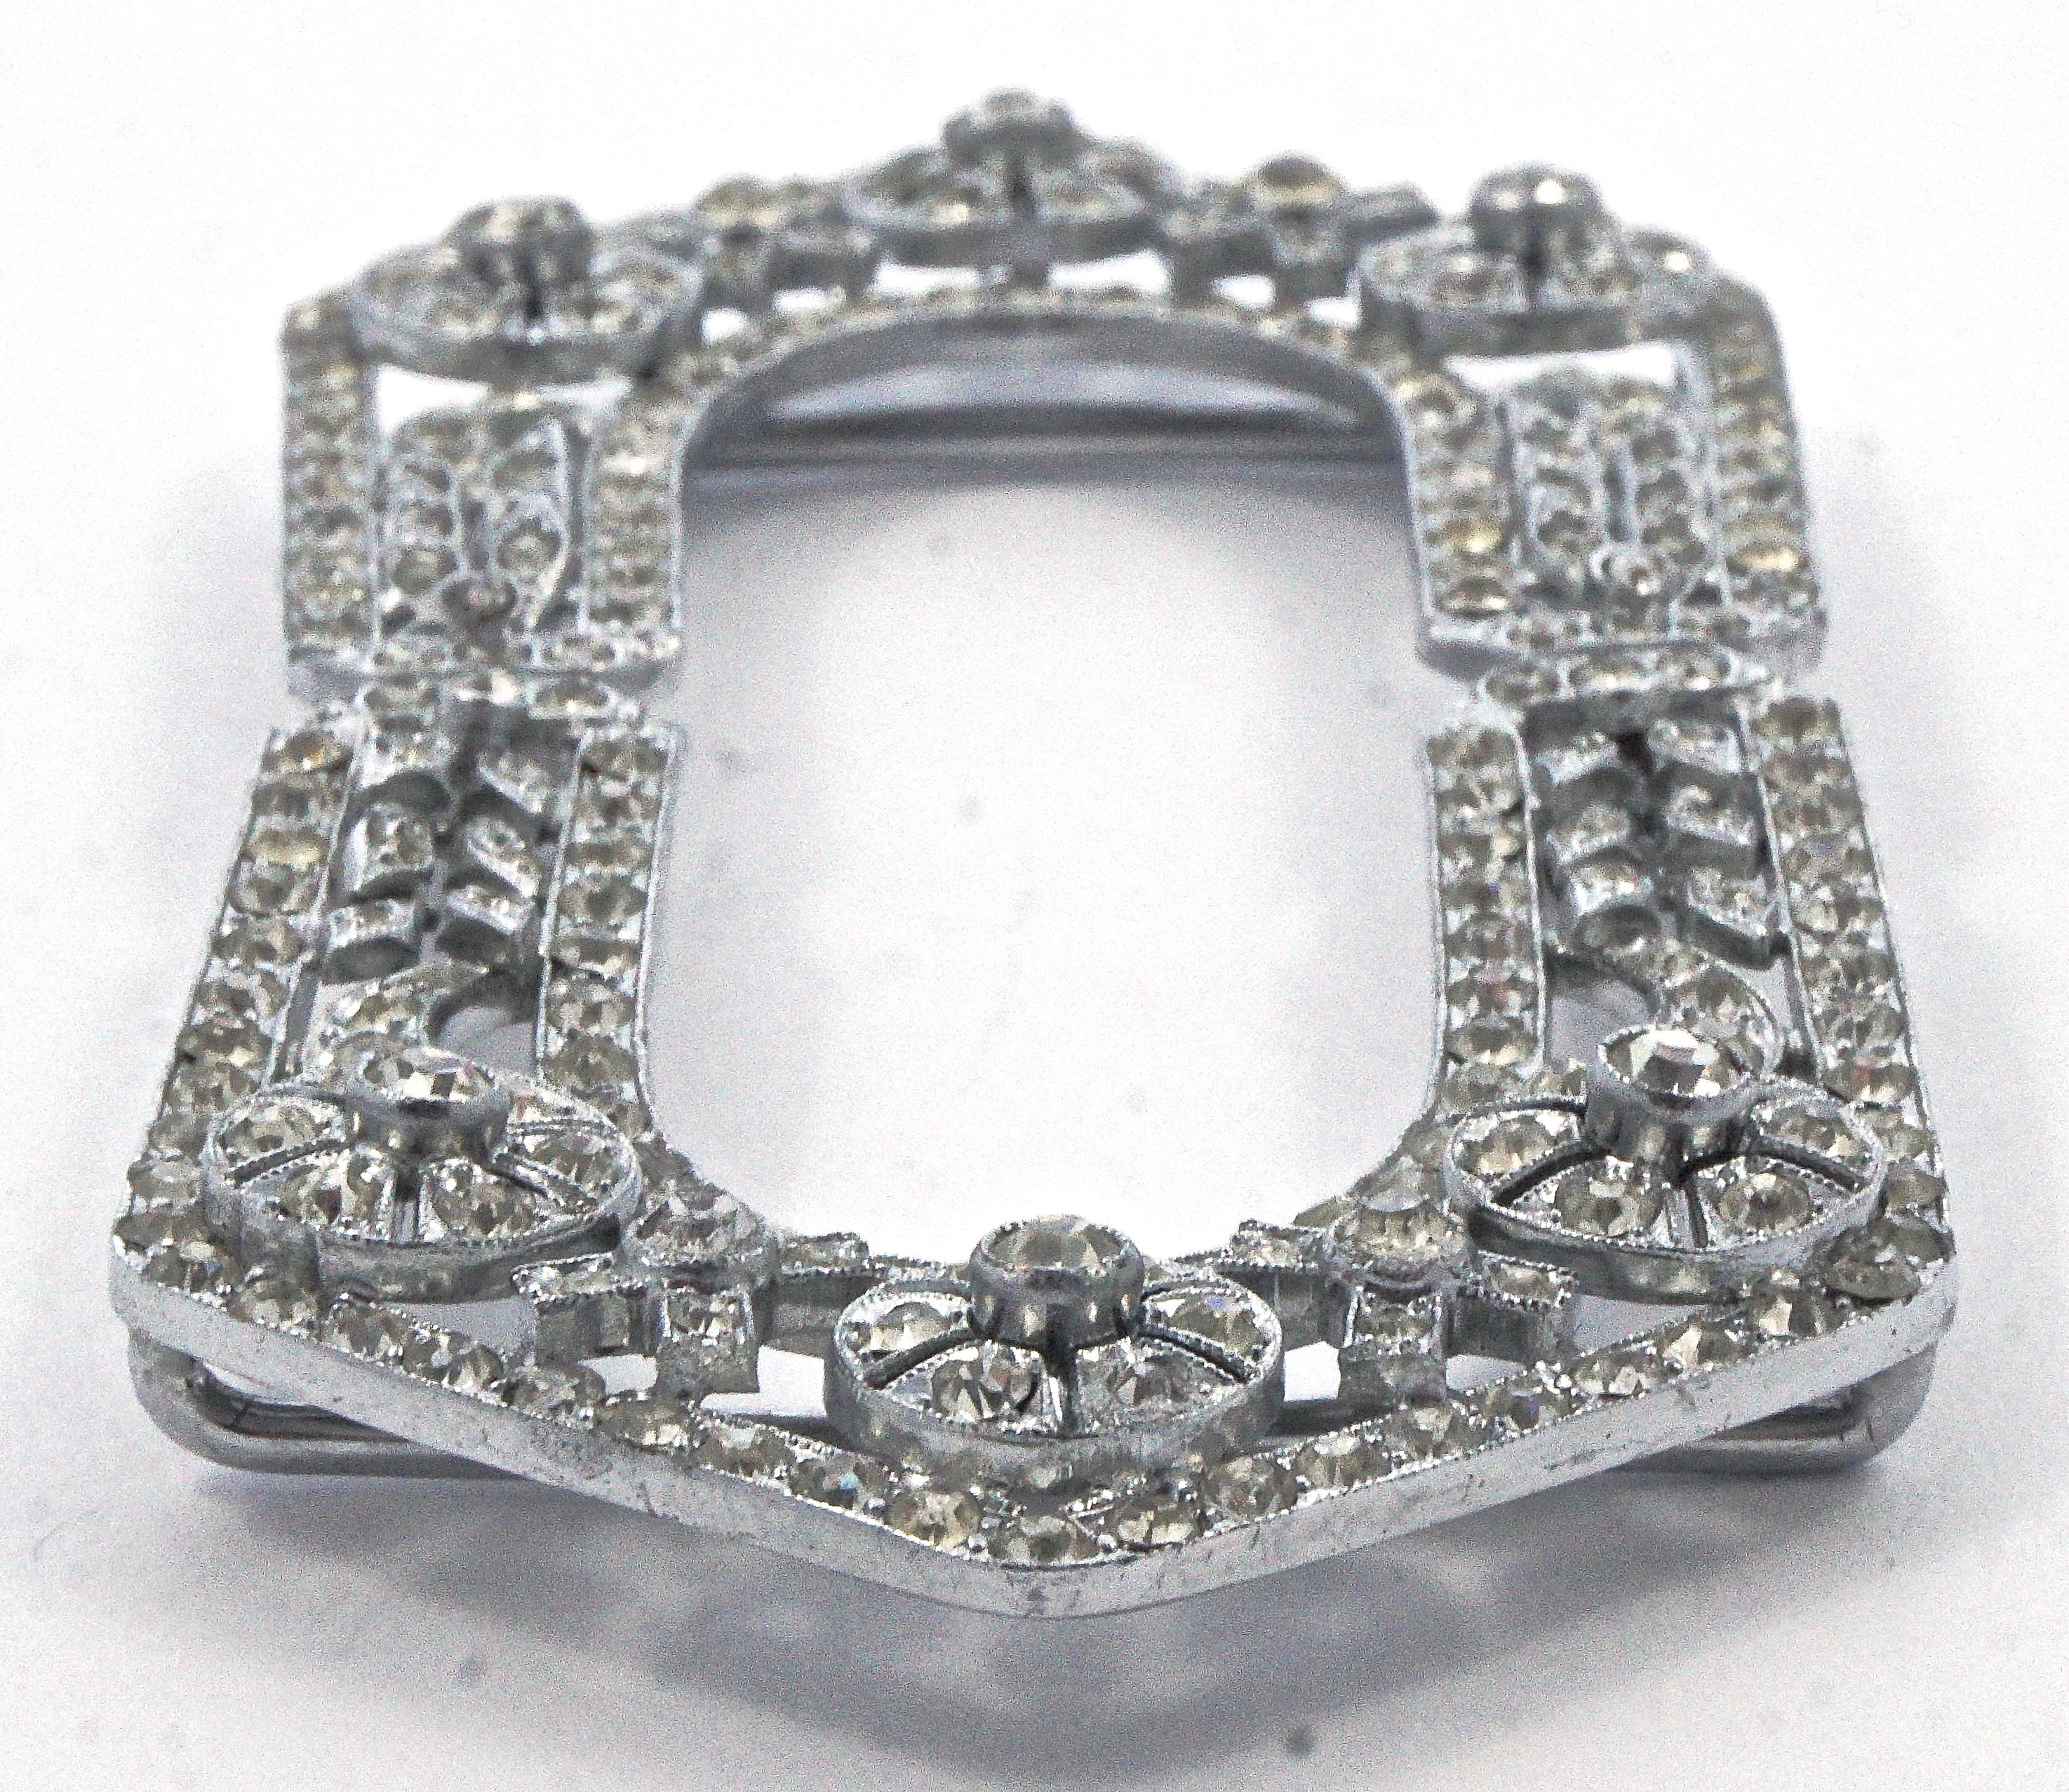 Large Art Deco Silver Tone and Rhinestone Belt Buckle In Good Condition For Sale In London, GB